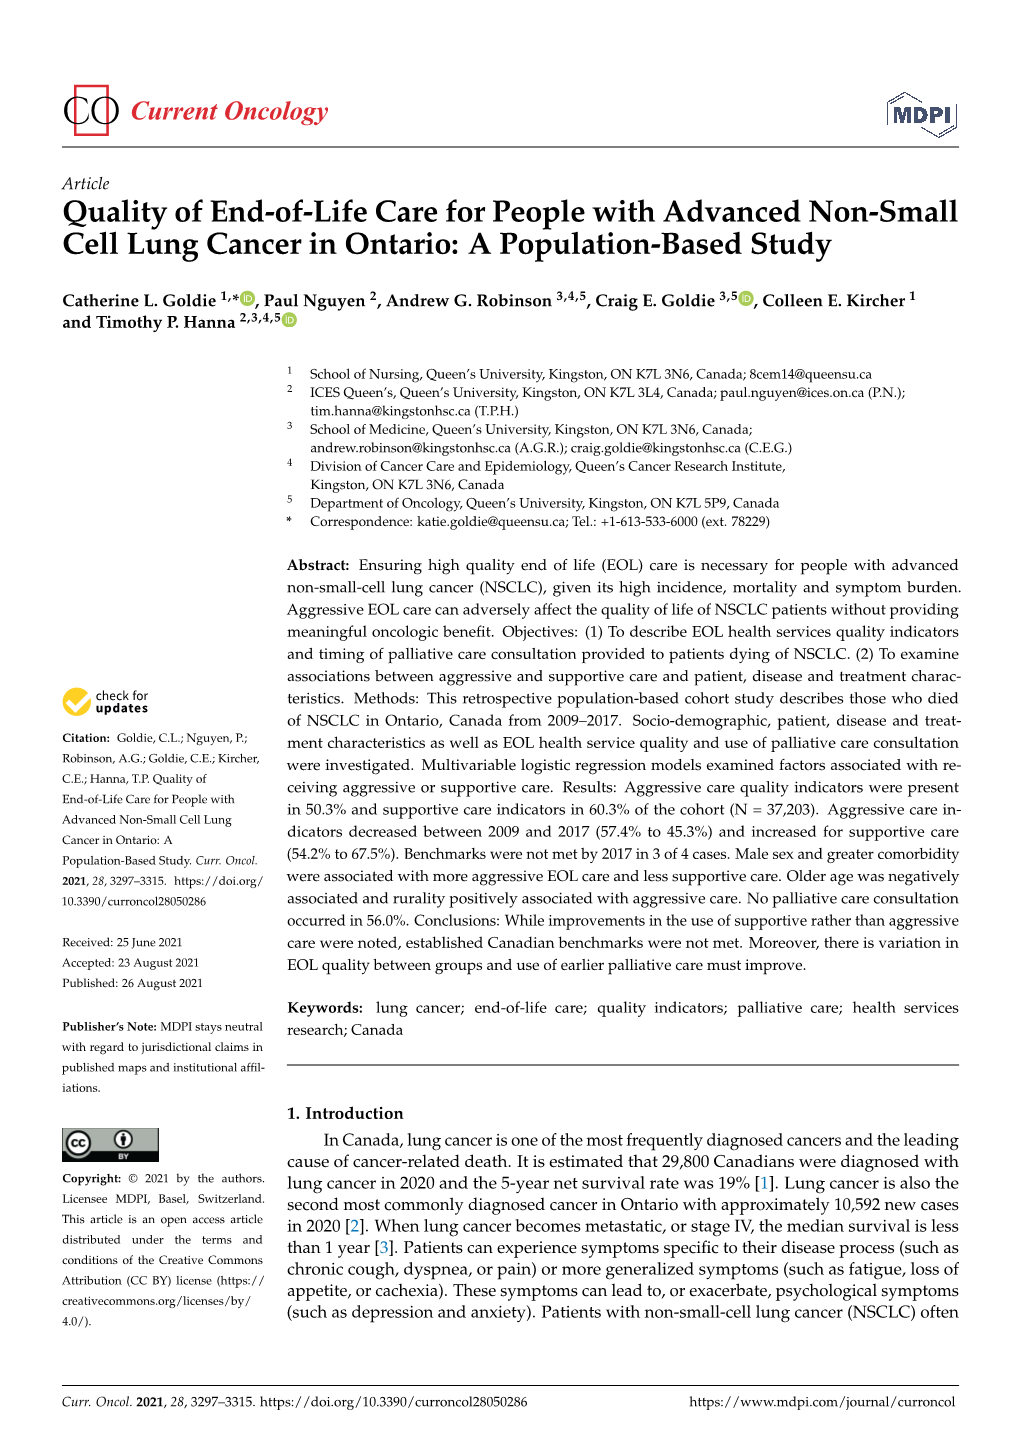 Quality of End-Of-Life Care for People with Advanced Non-Small Cell Lung Cancer in Ontario: a Population-Based Study